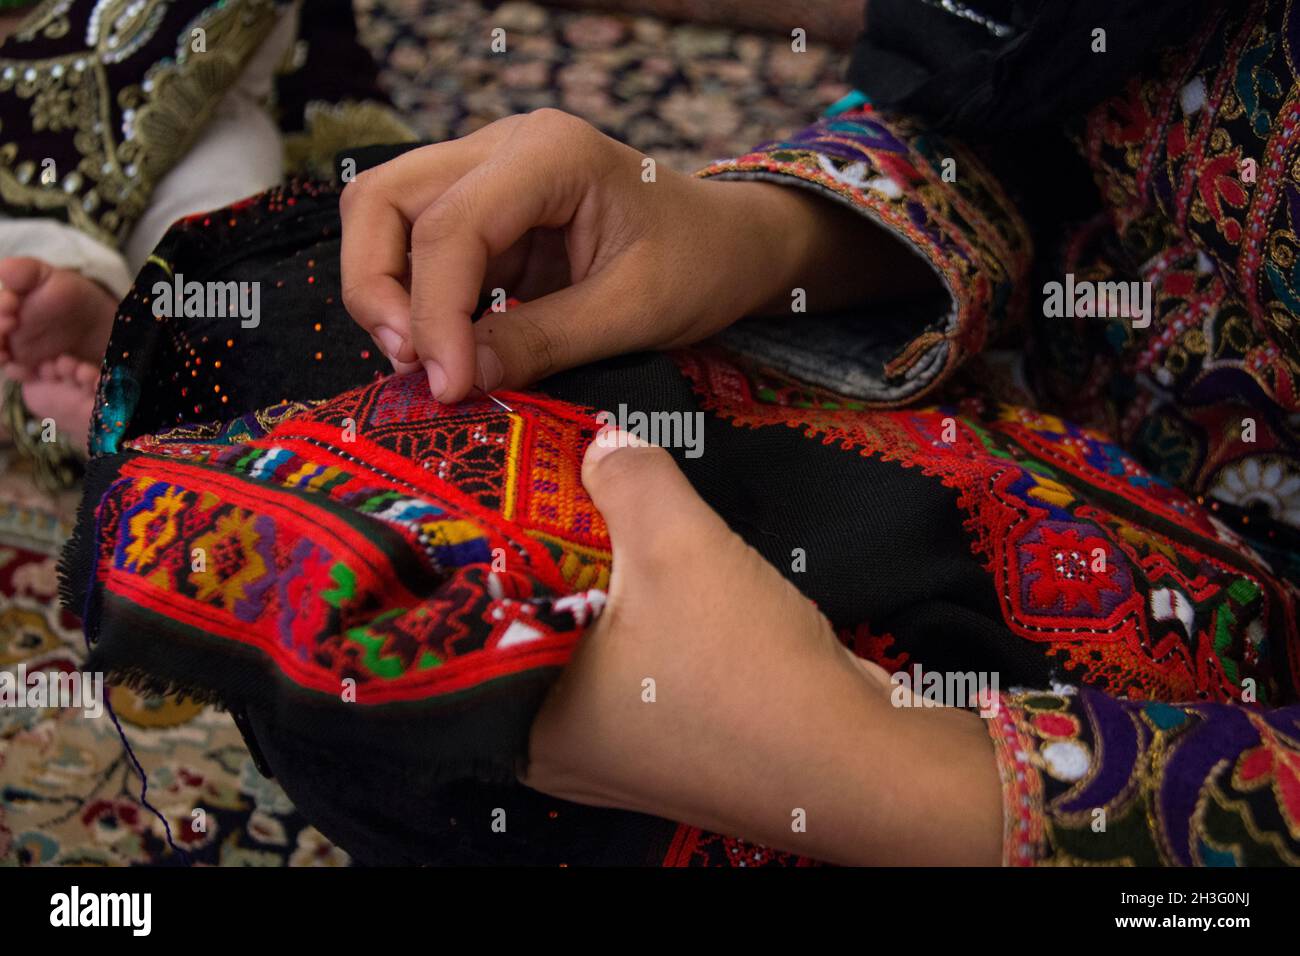 An Afghan immigrant girl in Iran is sewing a dress design. Stock Photo